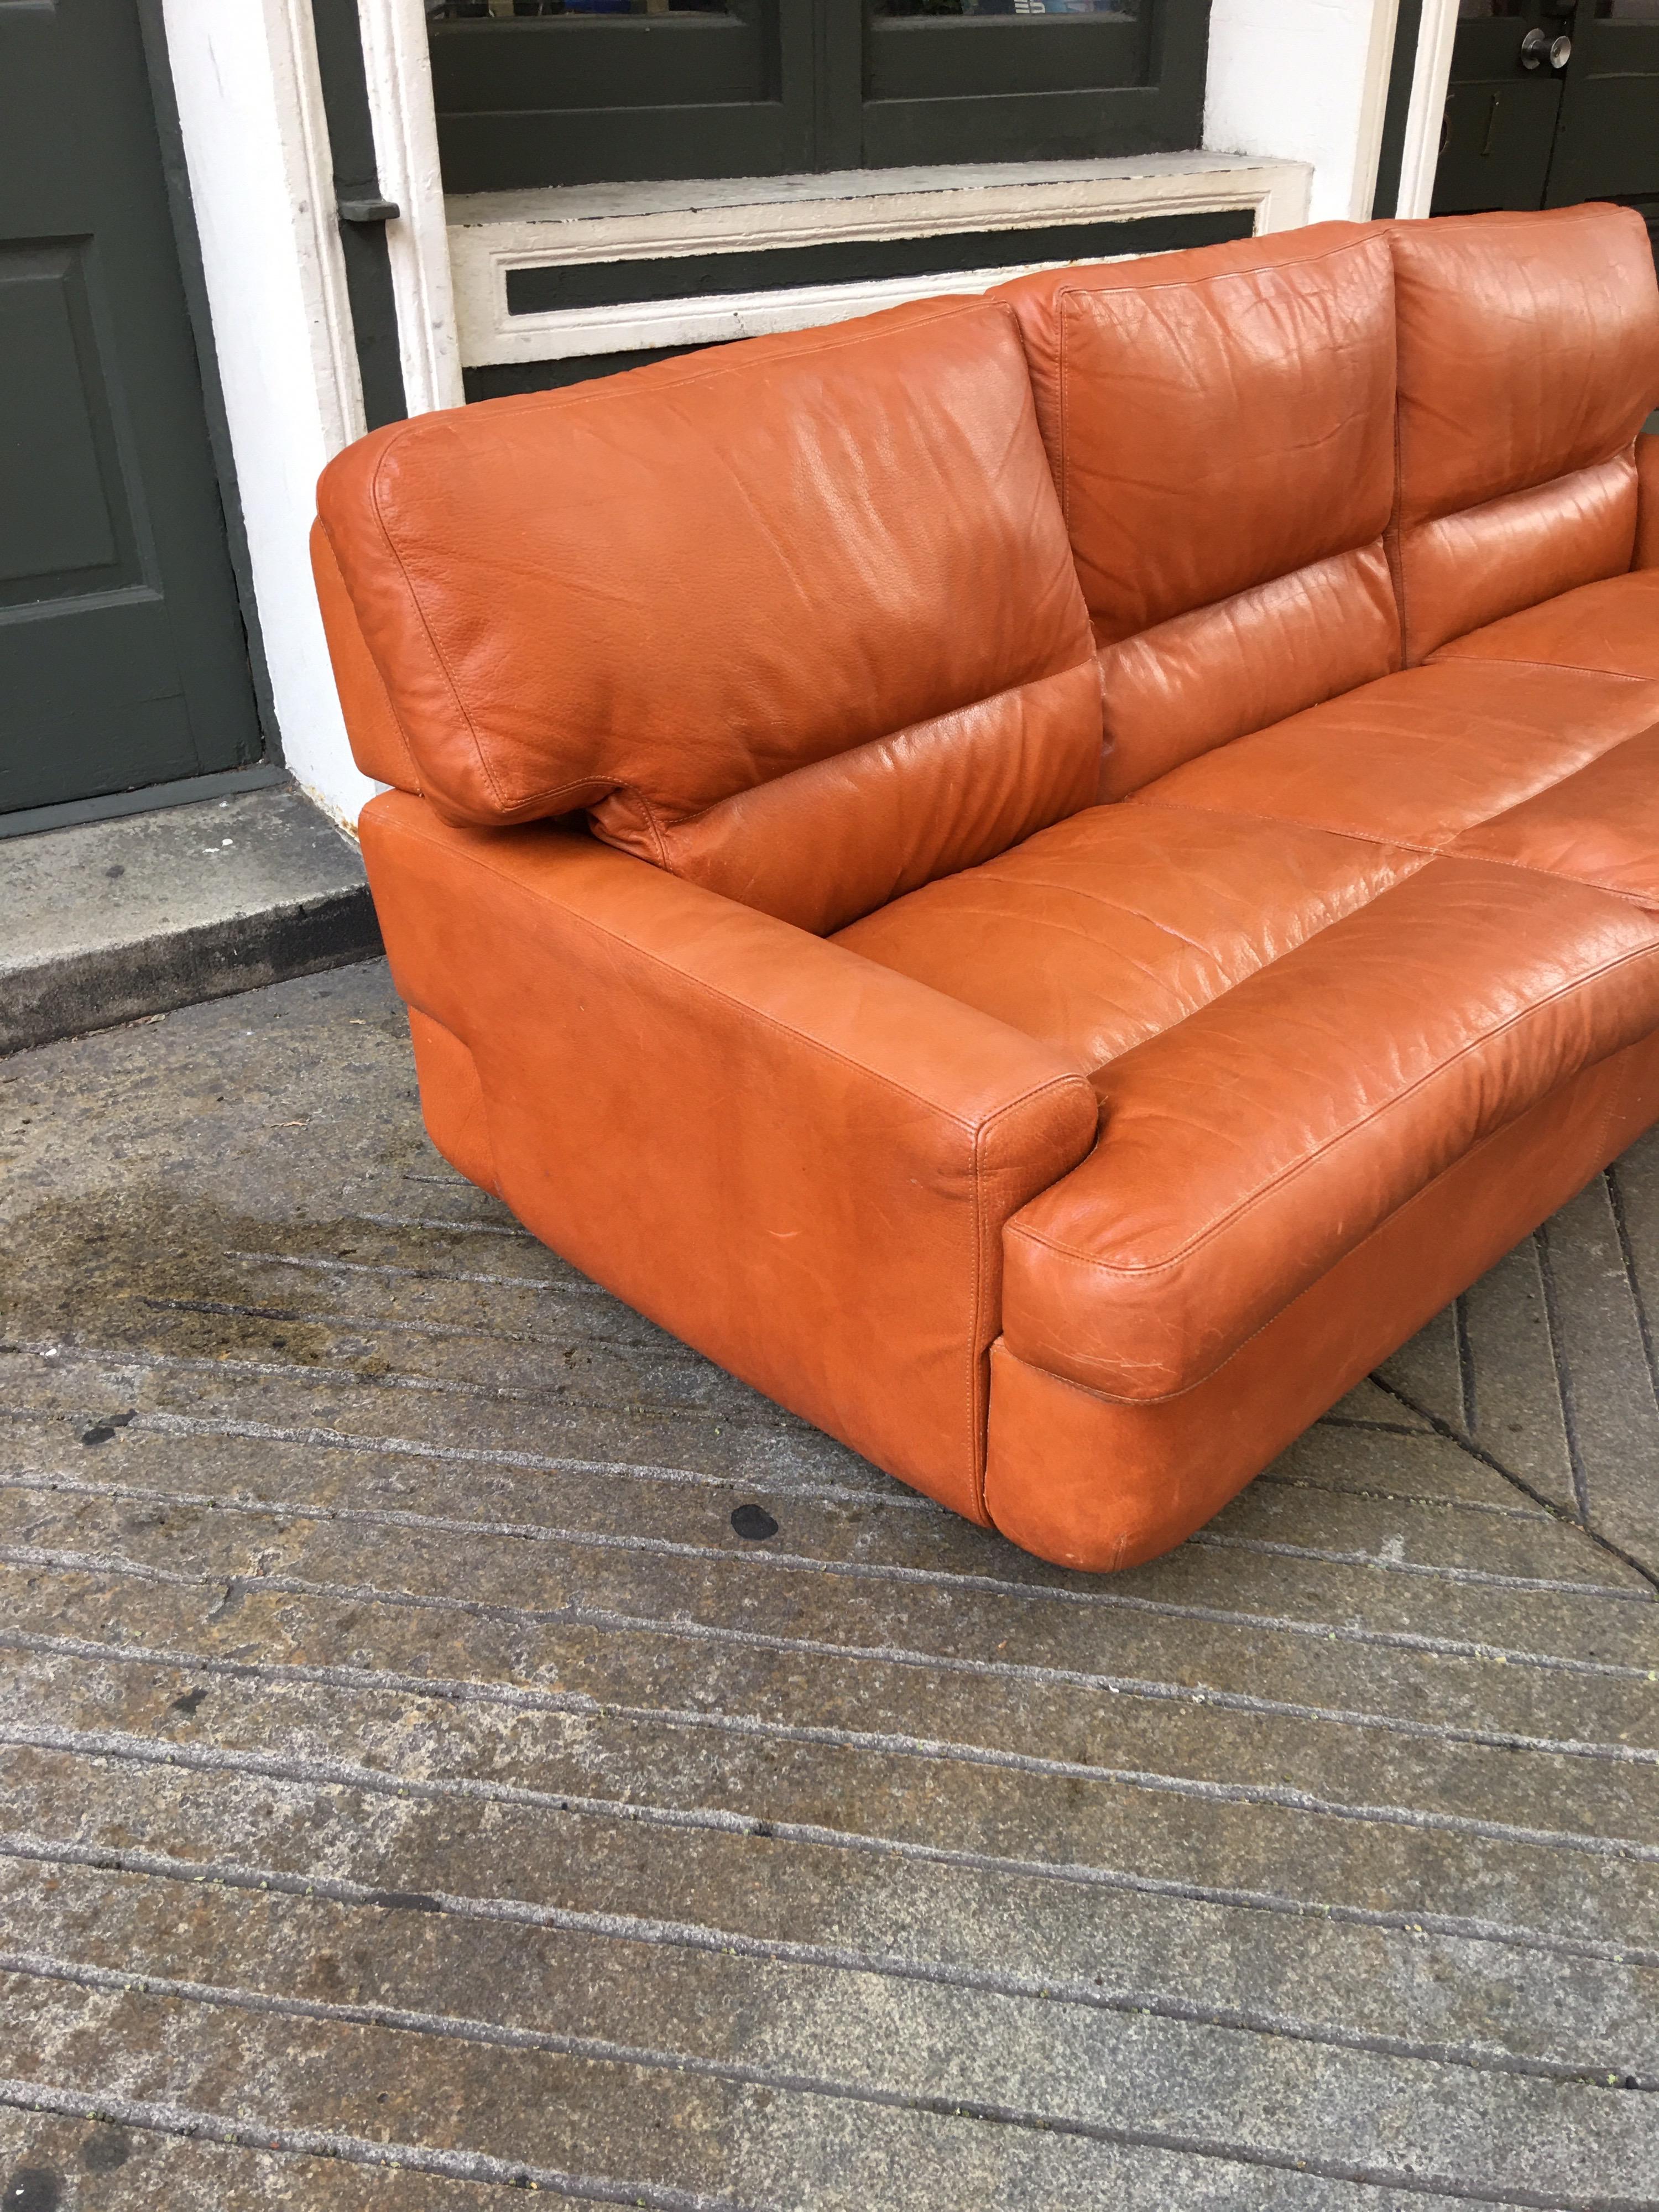 Saporitti 1970s Italian leather low and sleek sofa! Very comfy with a great profile to boot! Original Burnt orange leather in very nice condition, one small cigarette hole as seen in photo. Great detail to construction, looks good front and back!